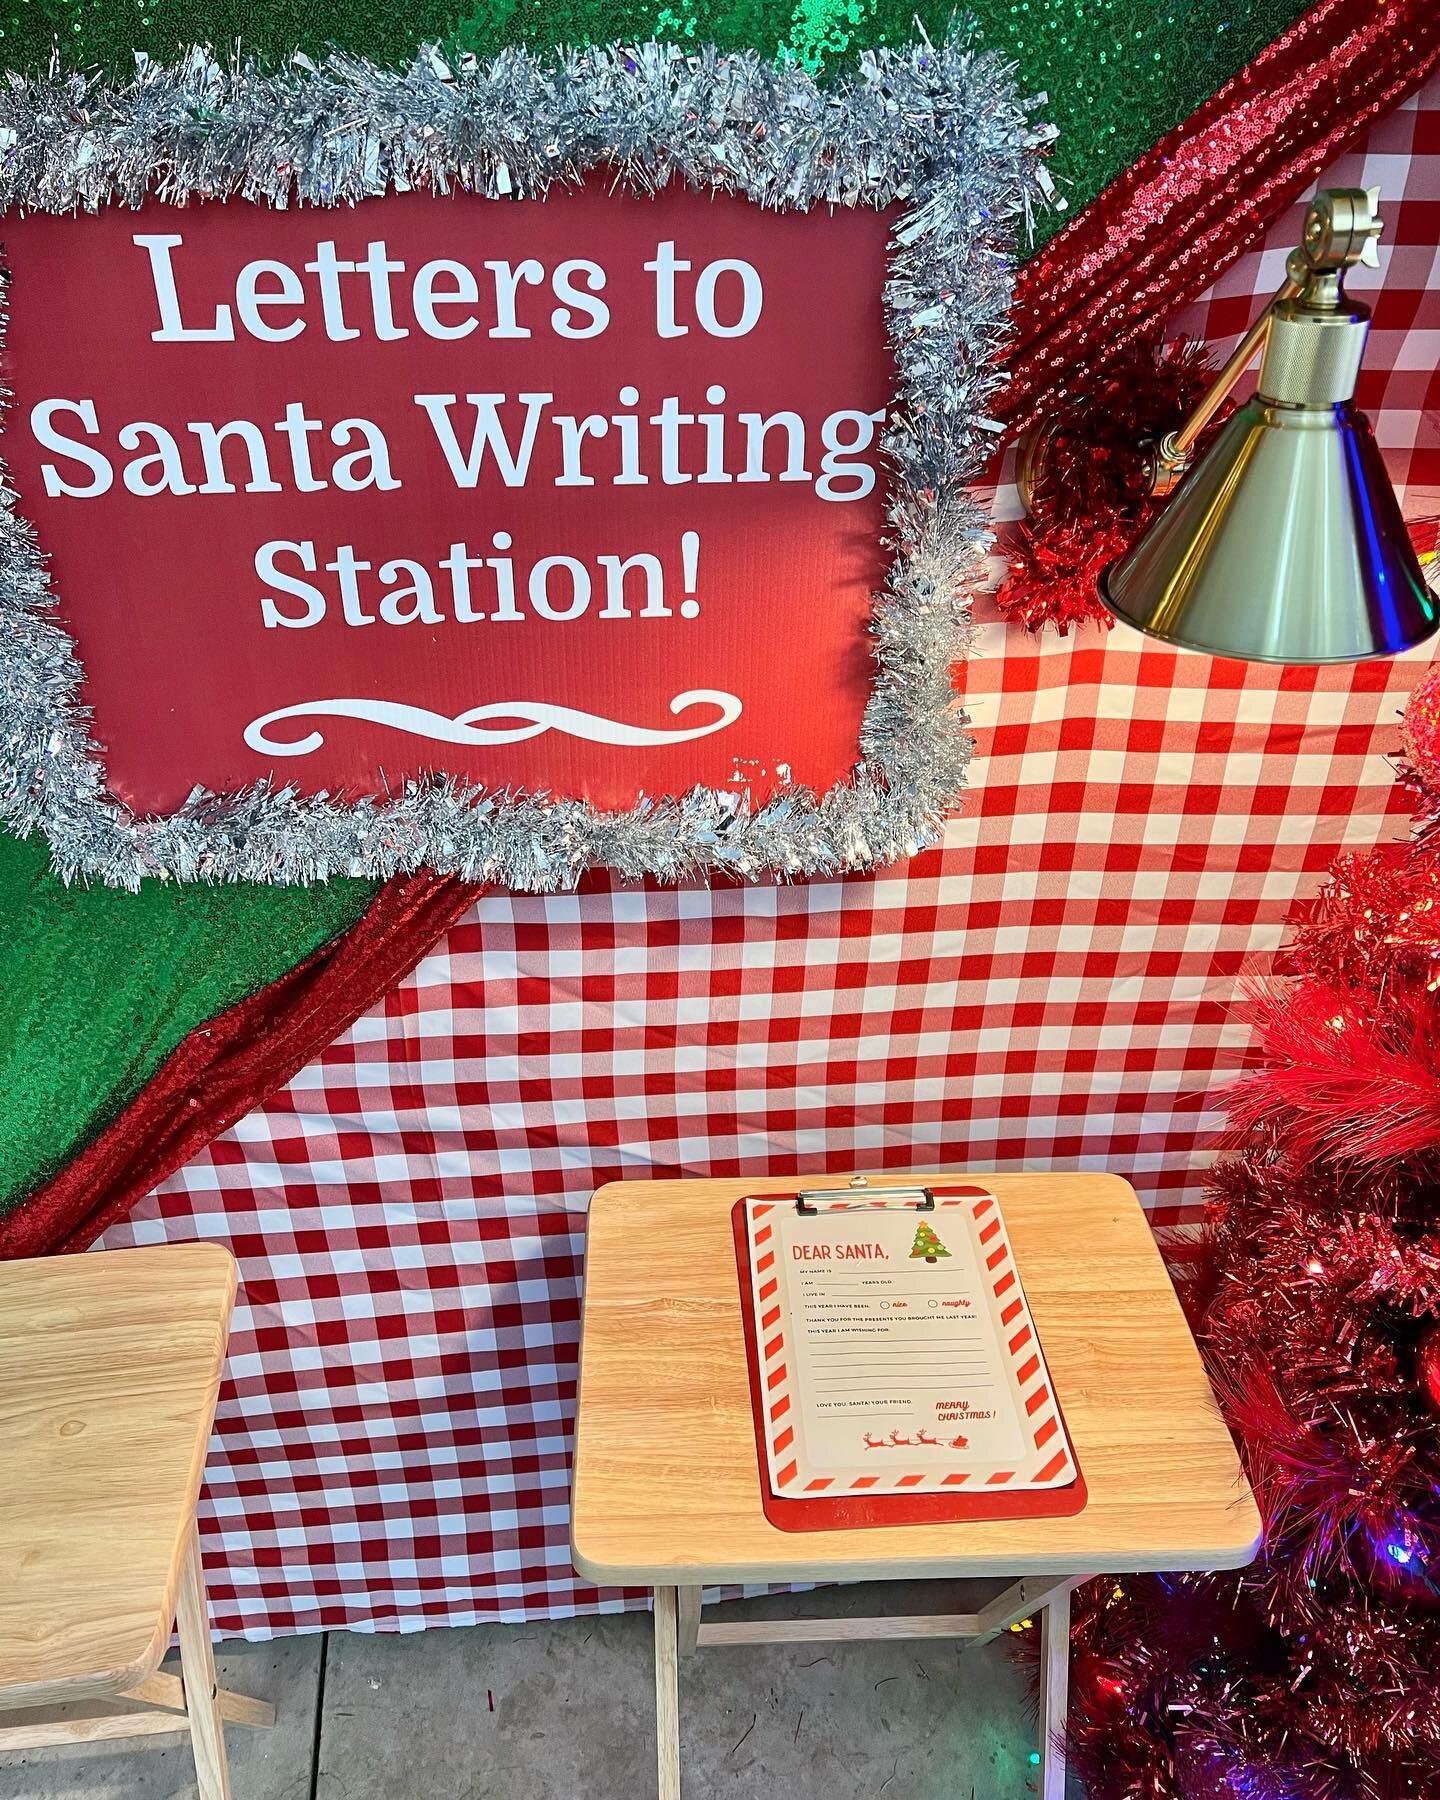 While you&rsquo;re here, don&rsquo;t forget to write your letter to Santa to drop in our official Santa Mailbox!! 🎅🏼✉️
.
.
.
.
.
.
.
.
.
.
.
.
.
.

#christmasateaglecrest #christmas #christmastree #xmas #christmasdecor #handmade #merrychristmas #wi